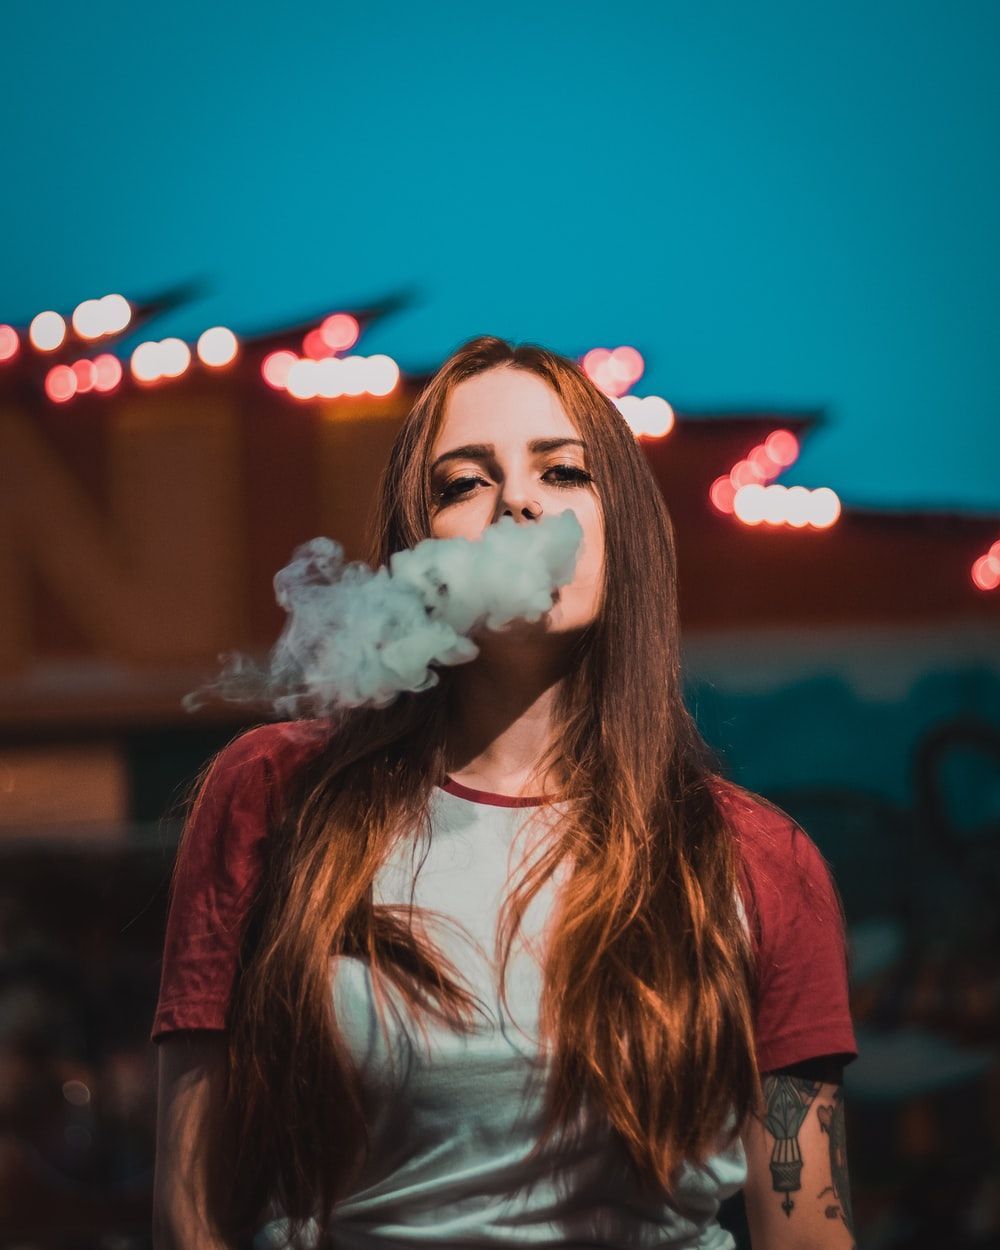 A woman with long brown hair blowing smoke from her mouth - Smoke